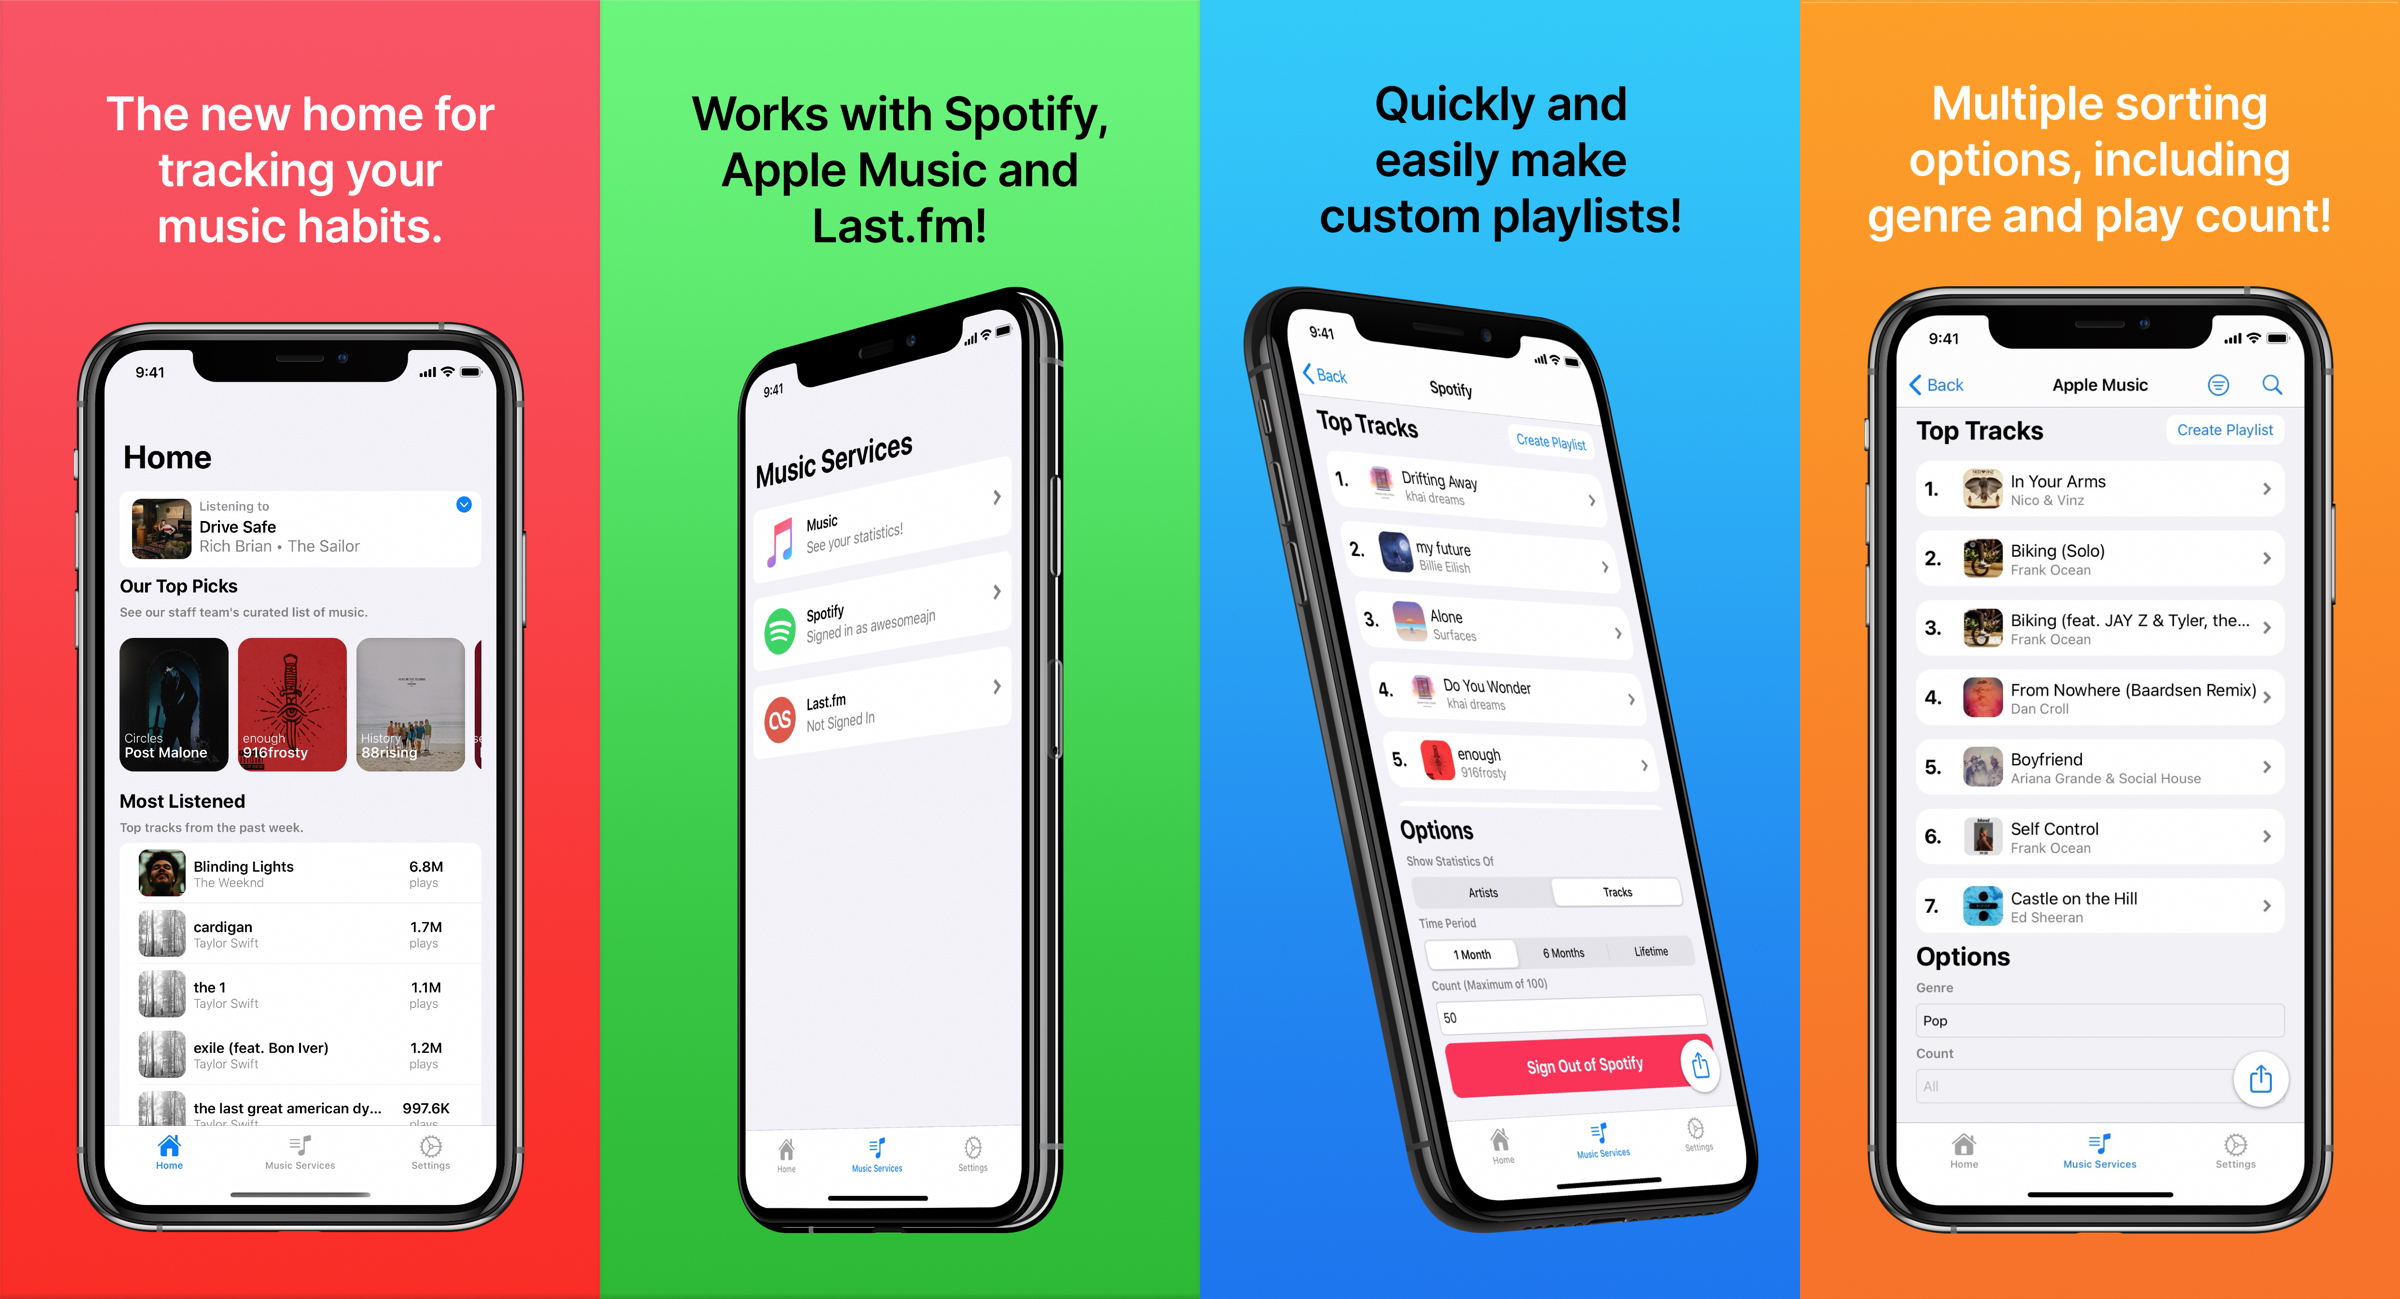 How to find your most played tracks and artists on Spotify or Apple Music